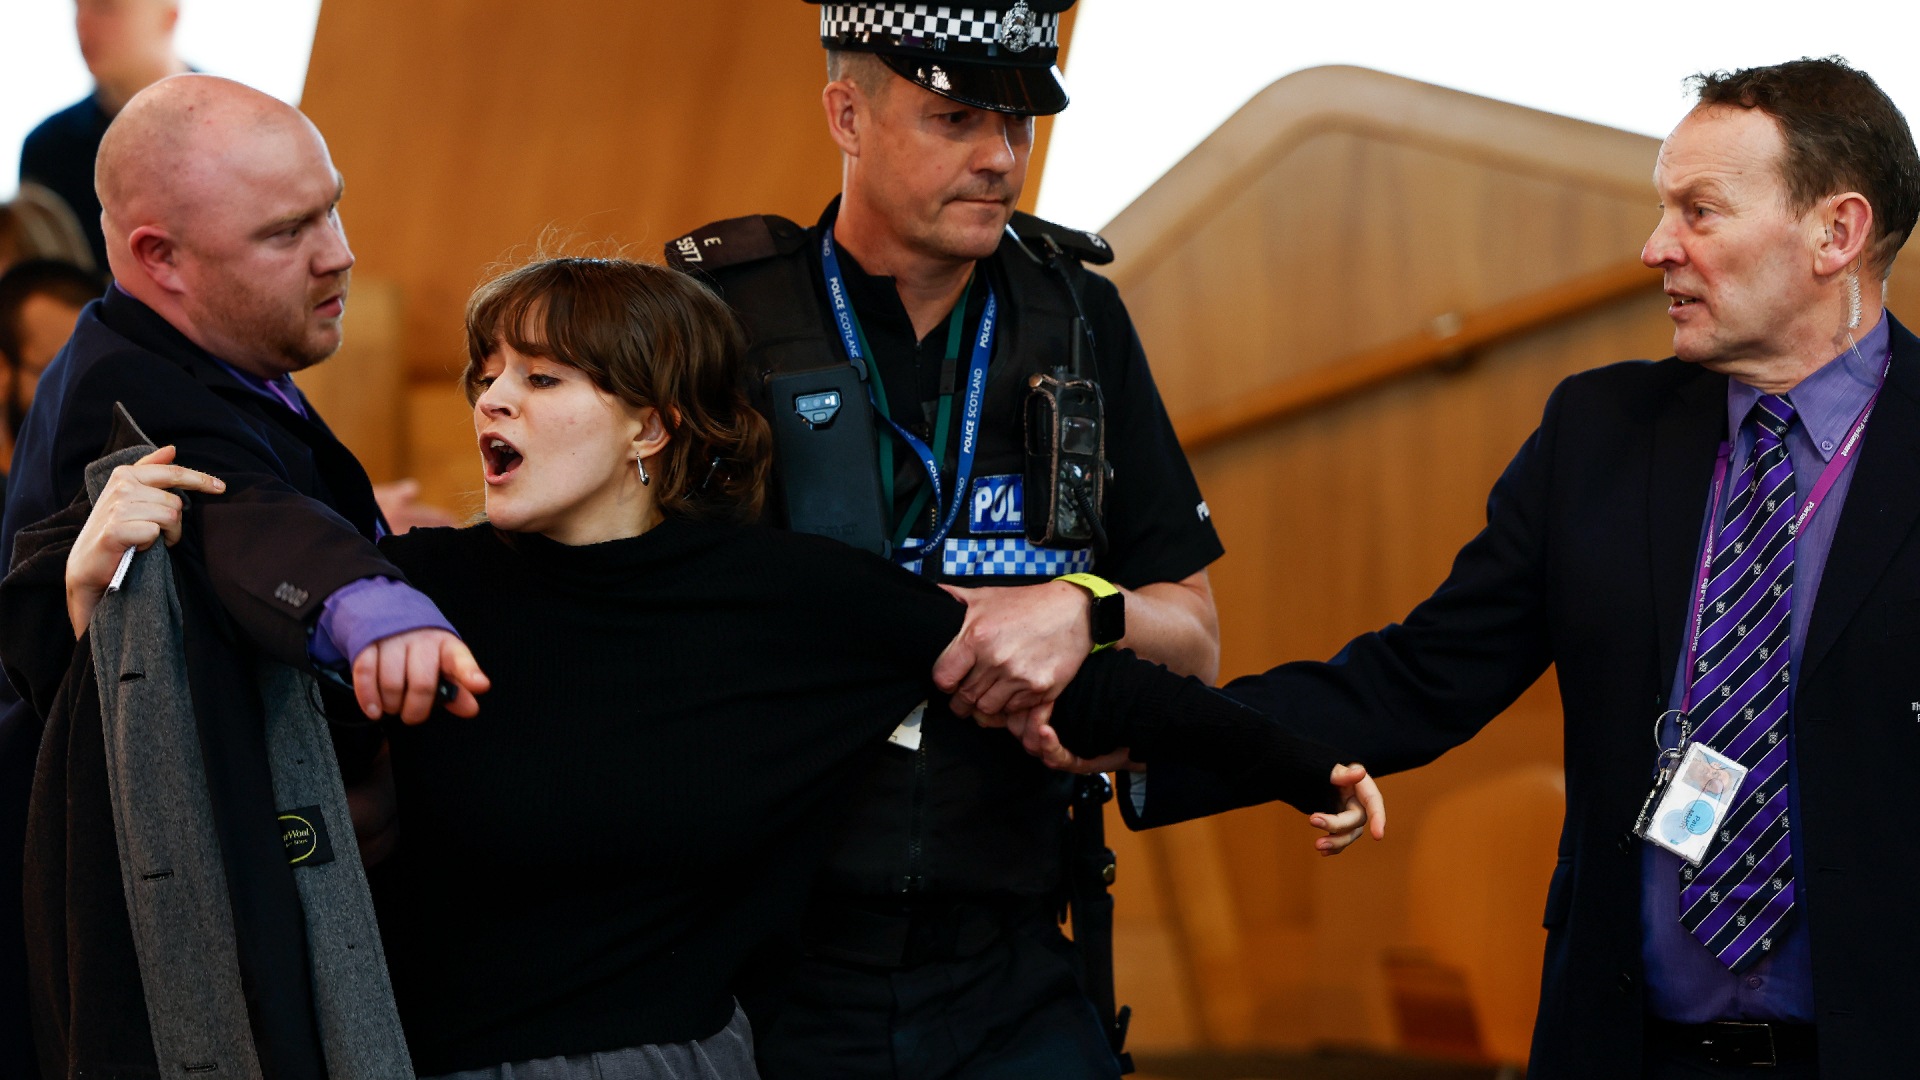 Police and security staff escort a protester from the public gallery during First Minister's Questions.